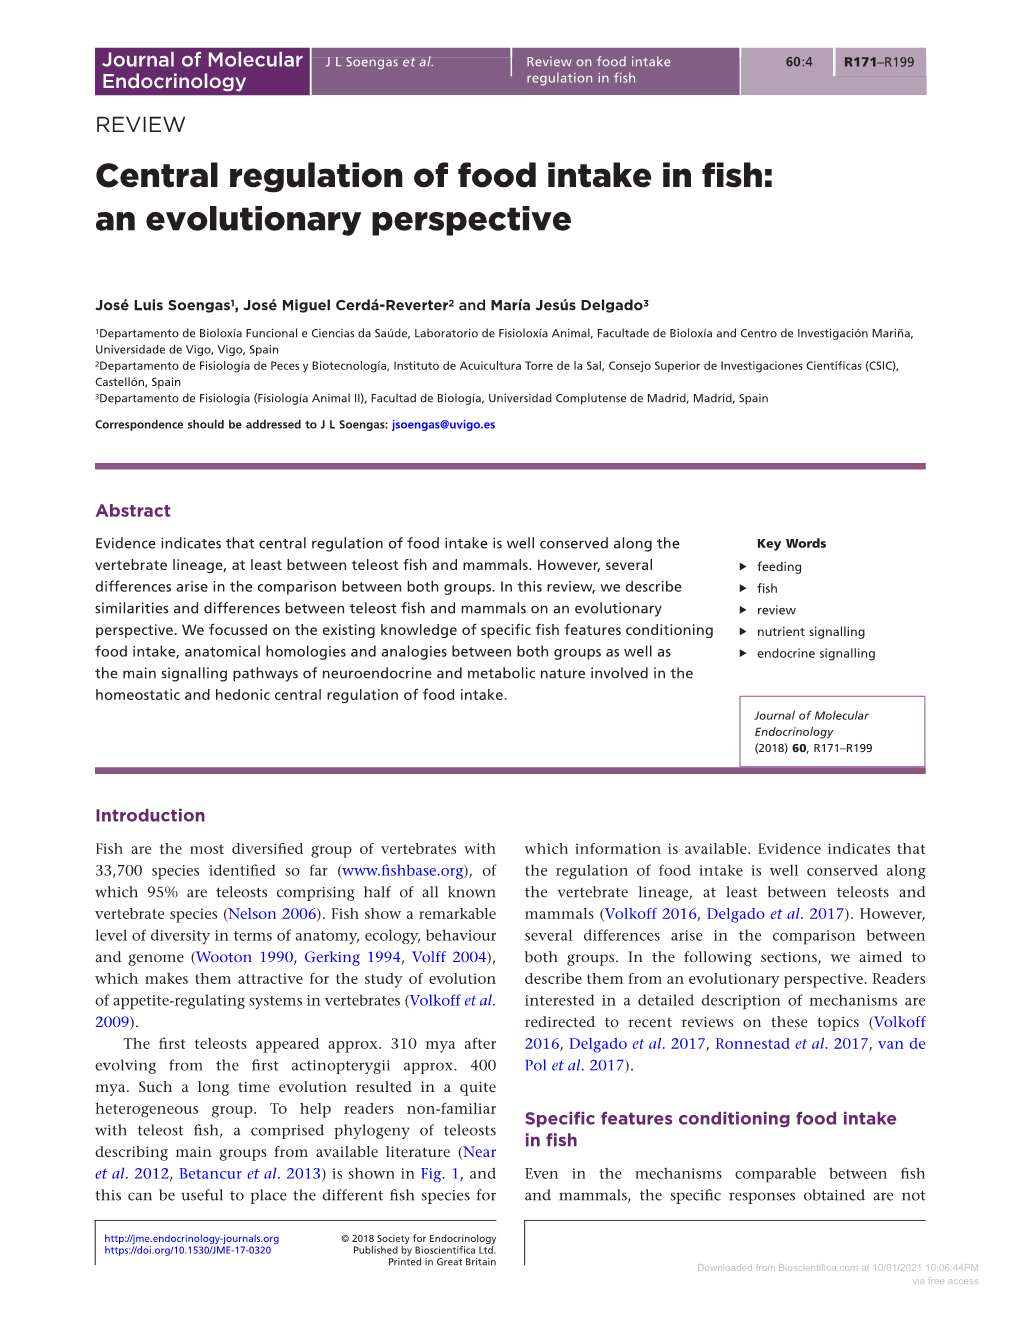 Central Regulation of Food Intake in Fish: an Evolutionary Perspective